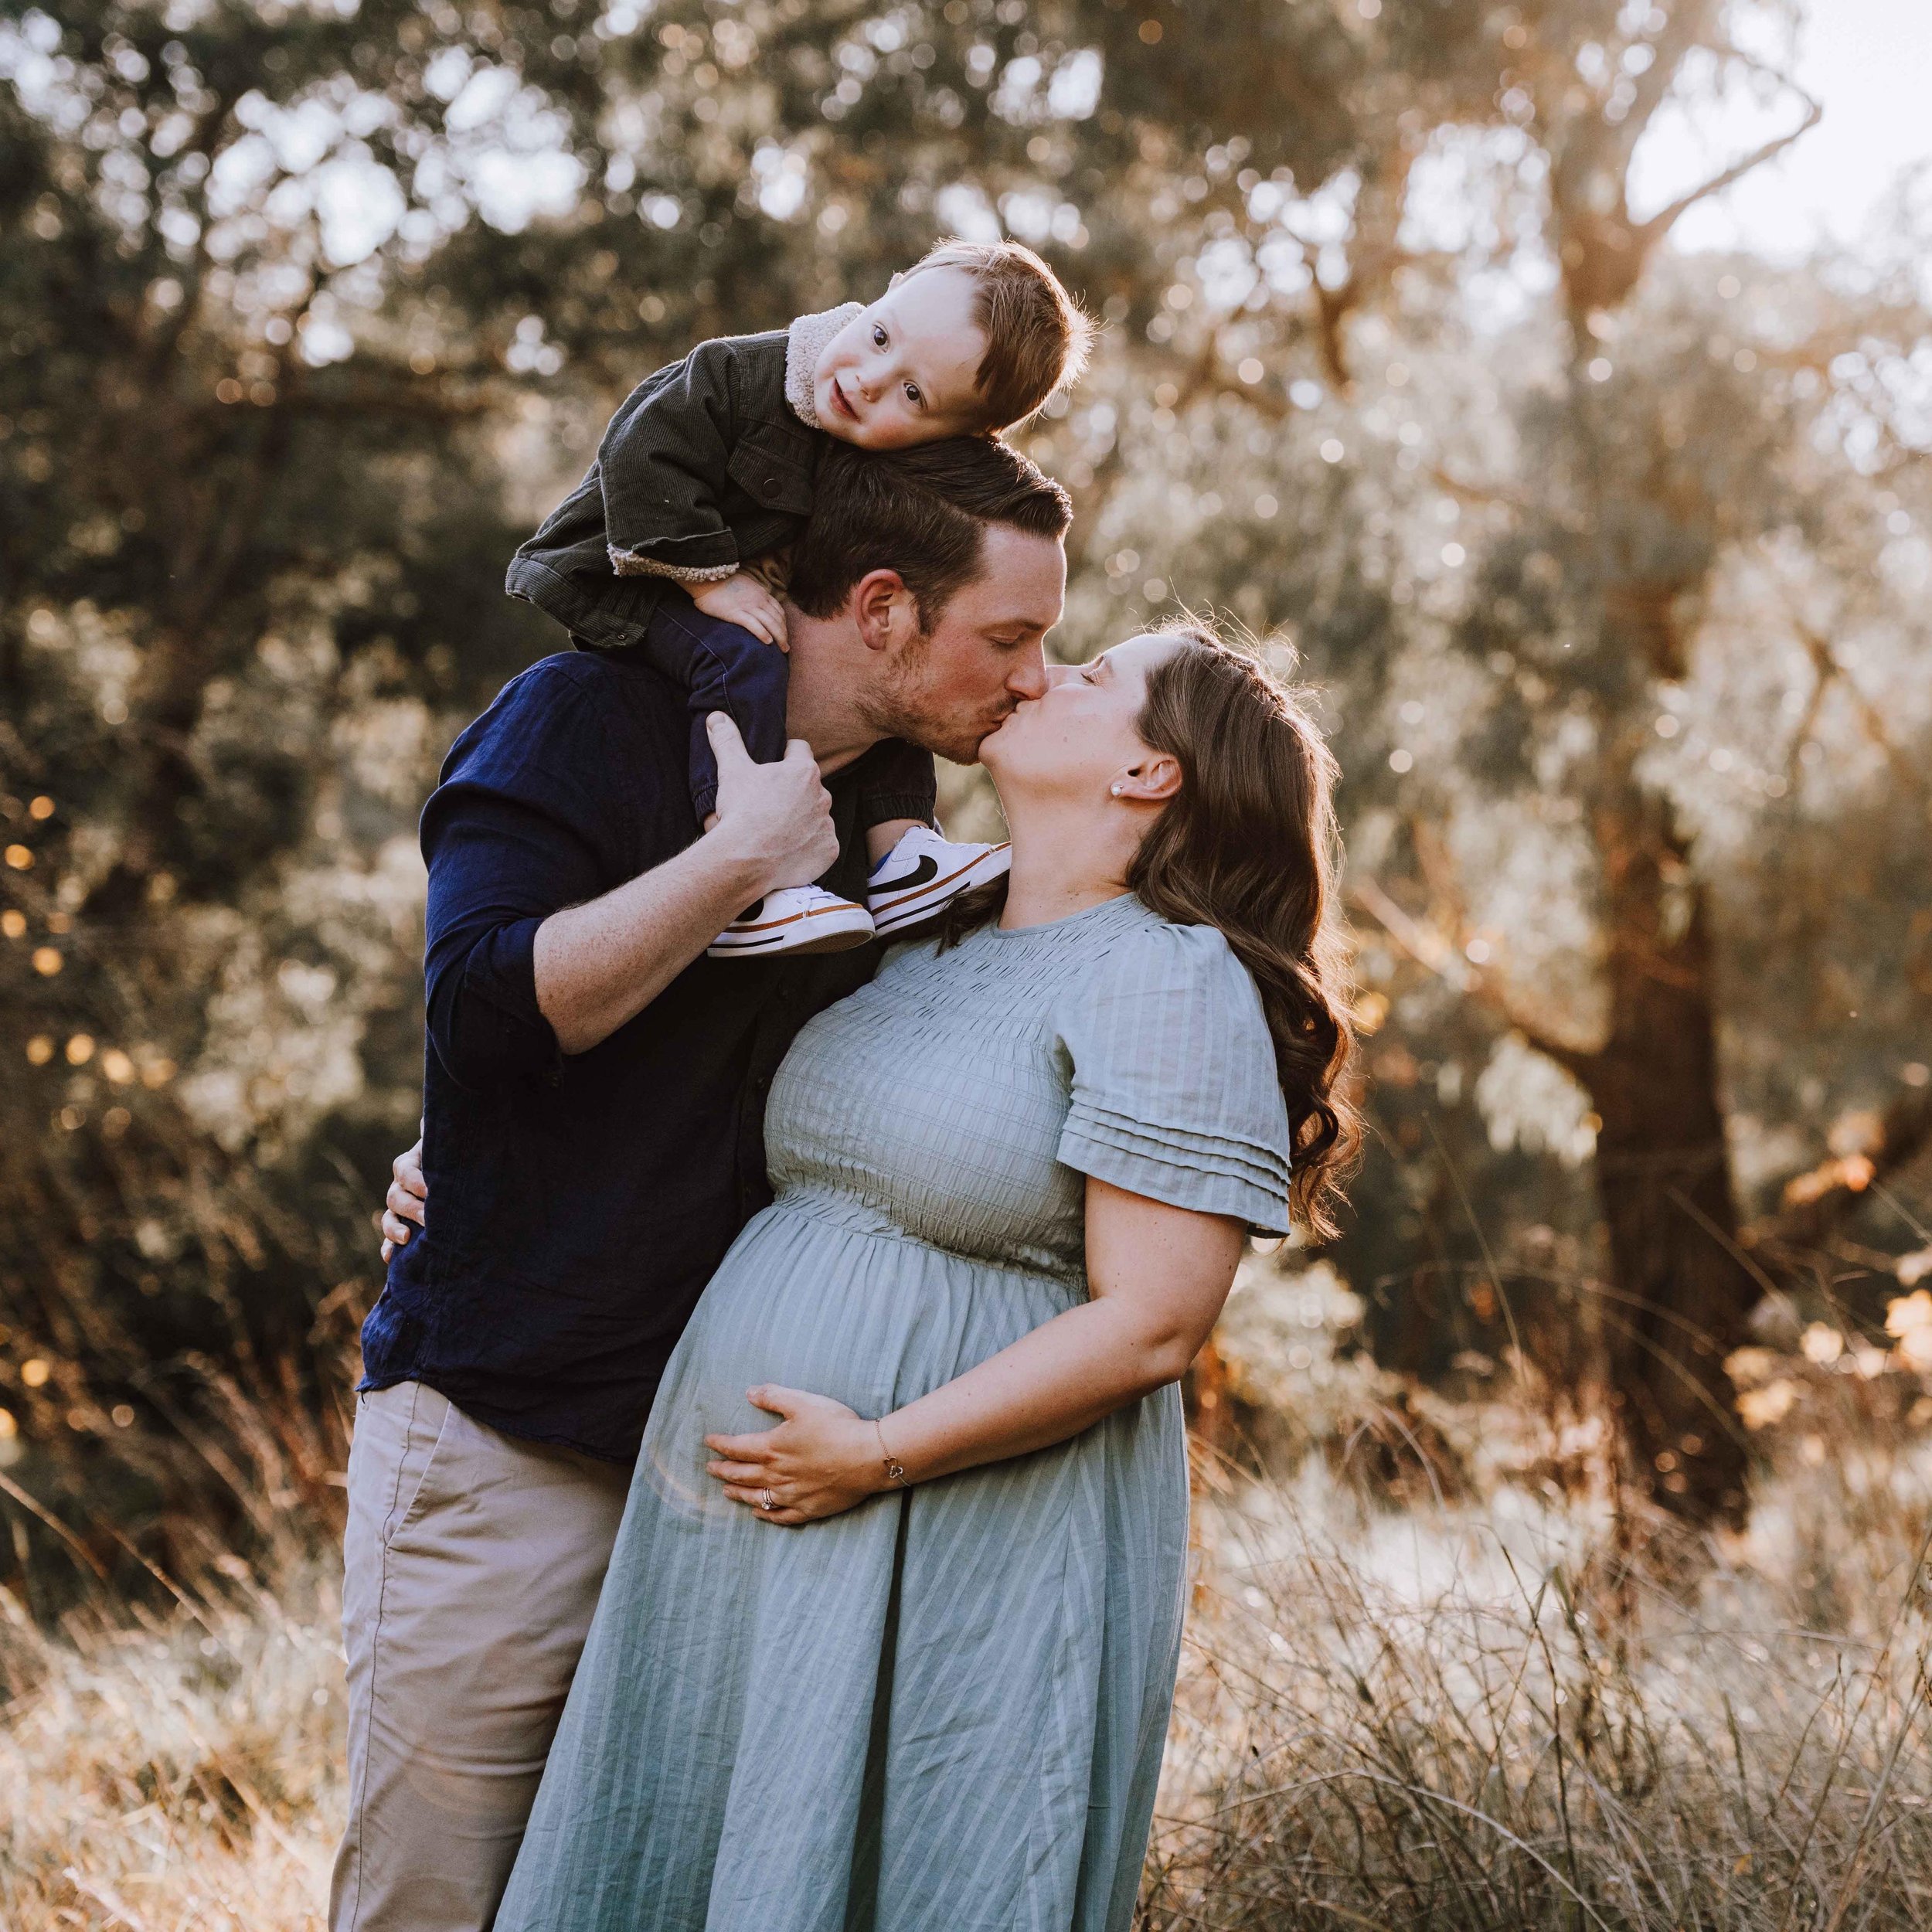 Steph and Cam are Harrison and???❤️❤️❤️ @tiziamayphotography @stephhunter412 #tiziamayphotography #melbournematernityphotographer #maternityshoot #melbournematernityphotography #maternityphotography